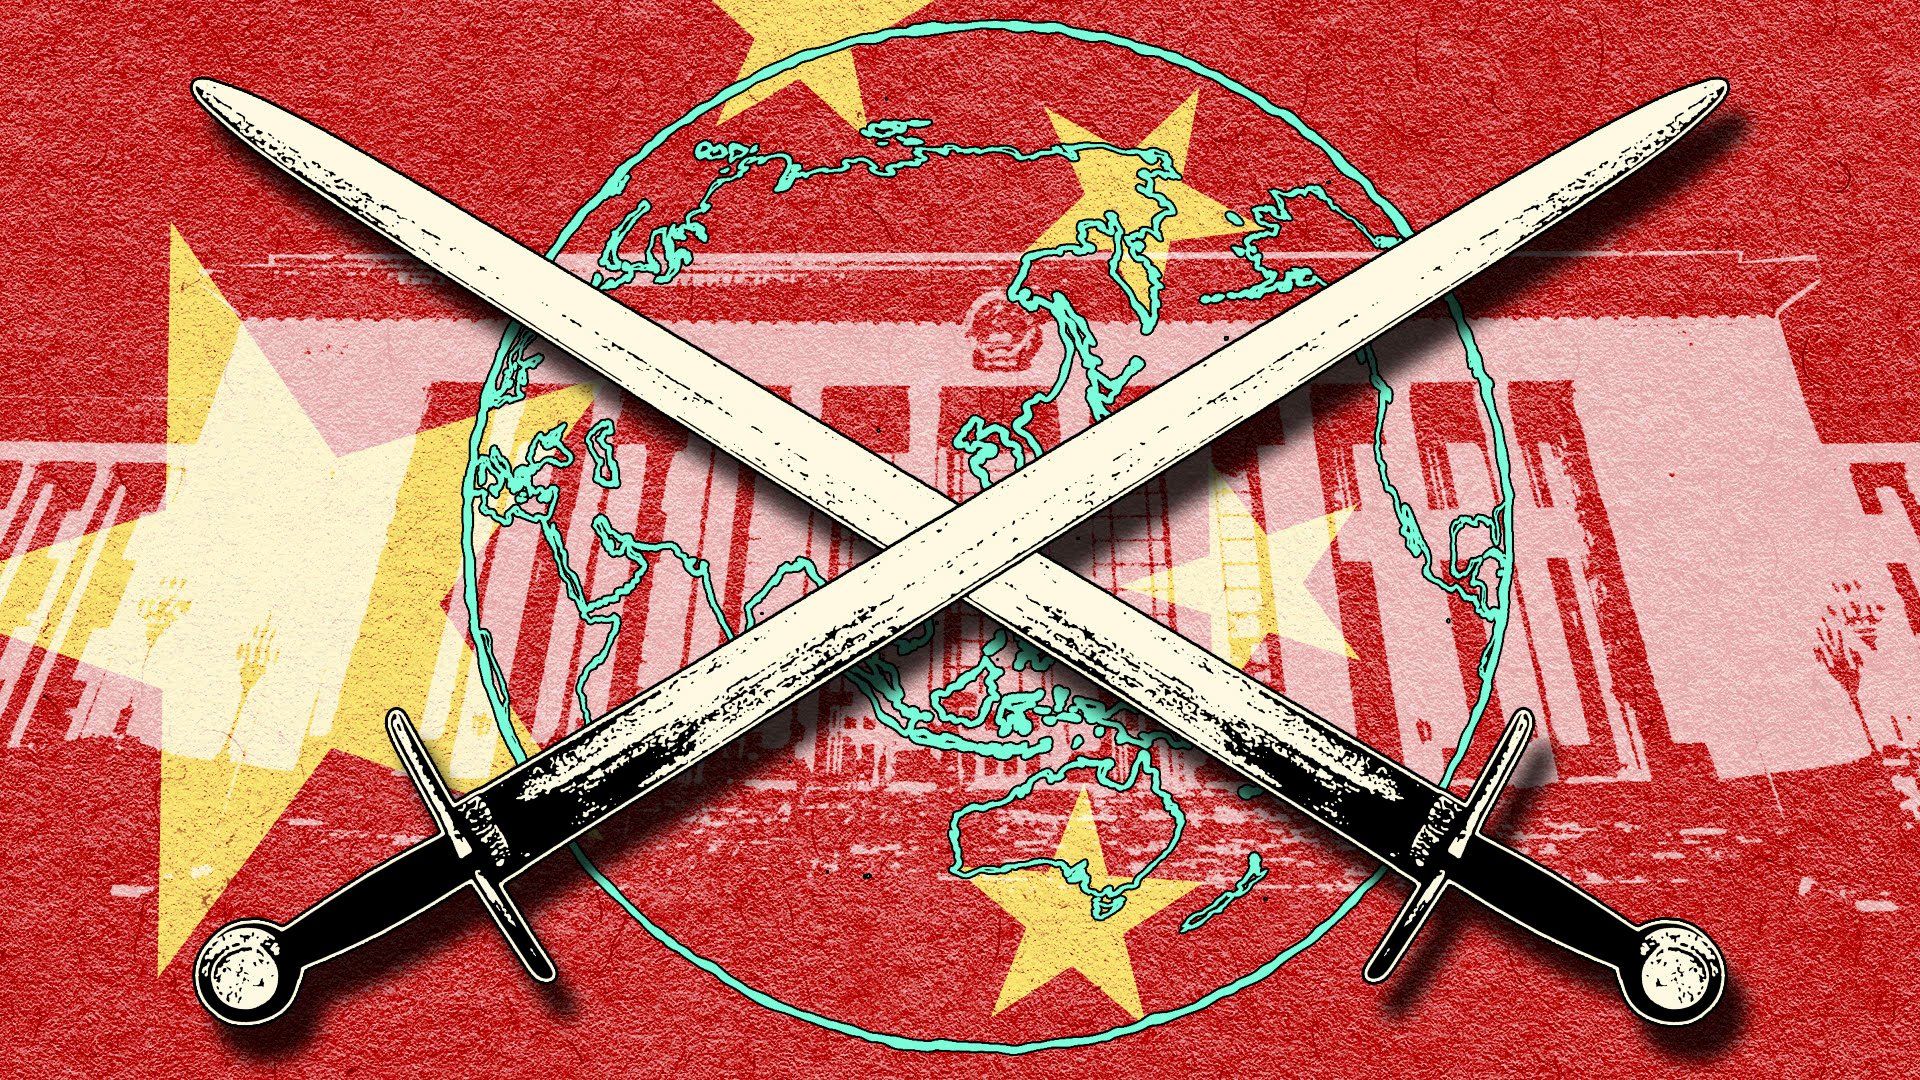 Crossed swords on a background of the Chinese flag, China's parliament, and an outline of a the globe